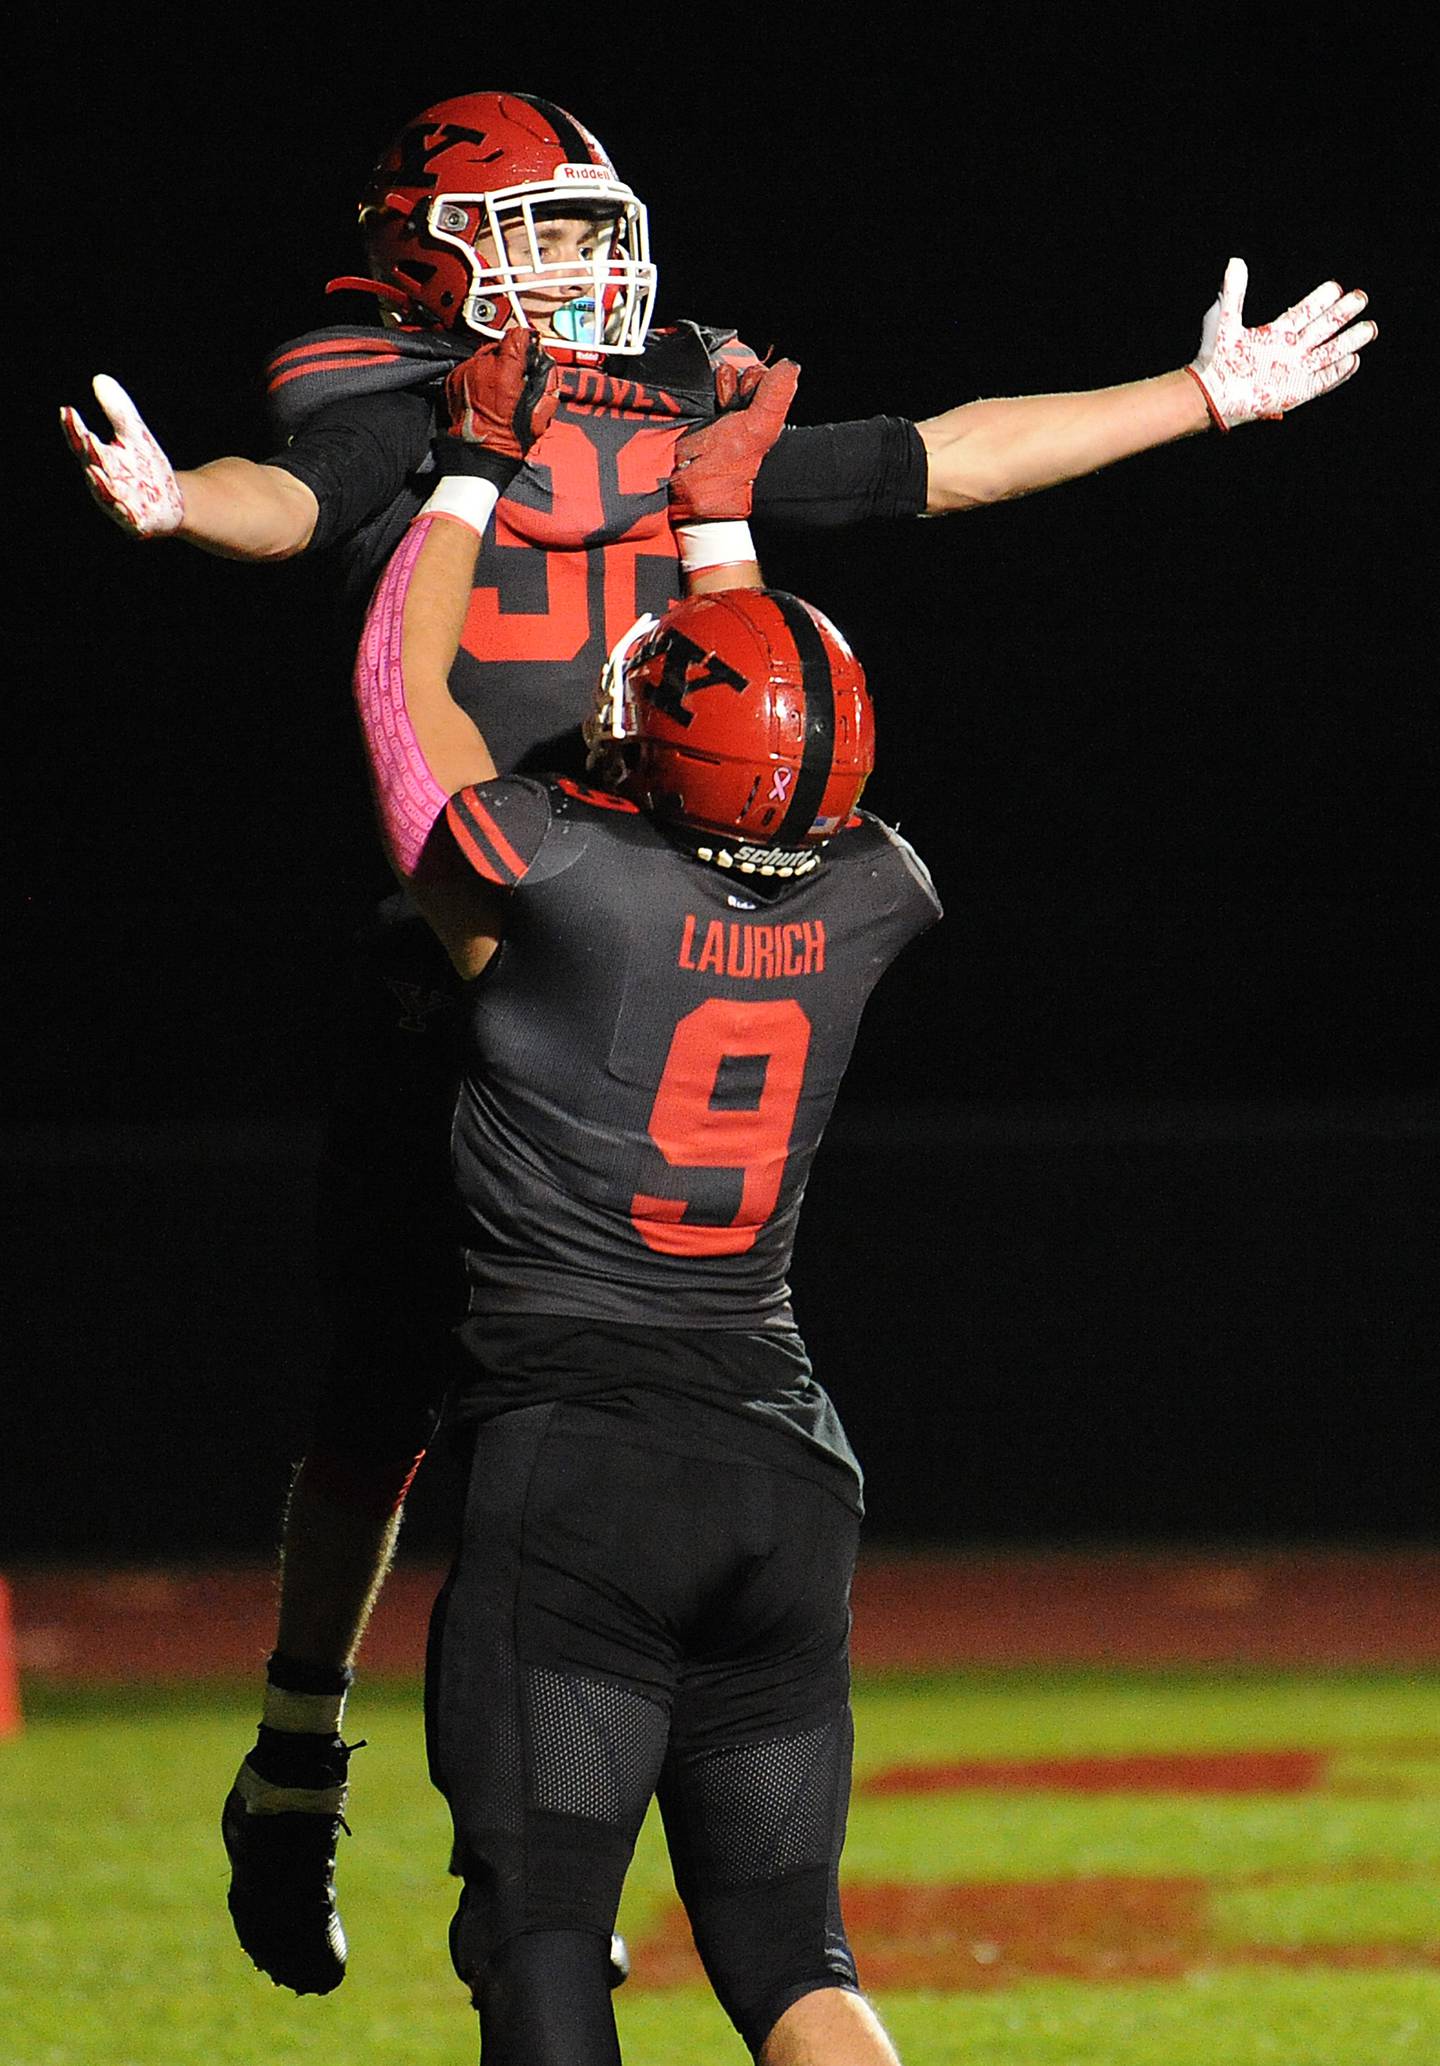 Yorkville tightend Andrew Laurich hoists runningback Gio Zeman into the air, to celebrate a touchdown against Oswego during a varsity football game at Yorkville High School on Friday.